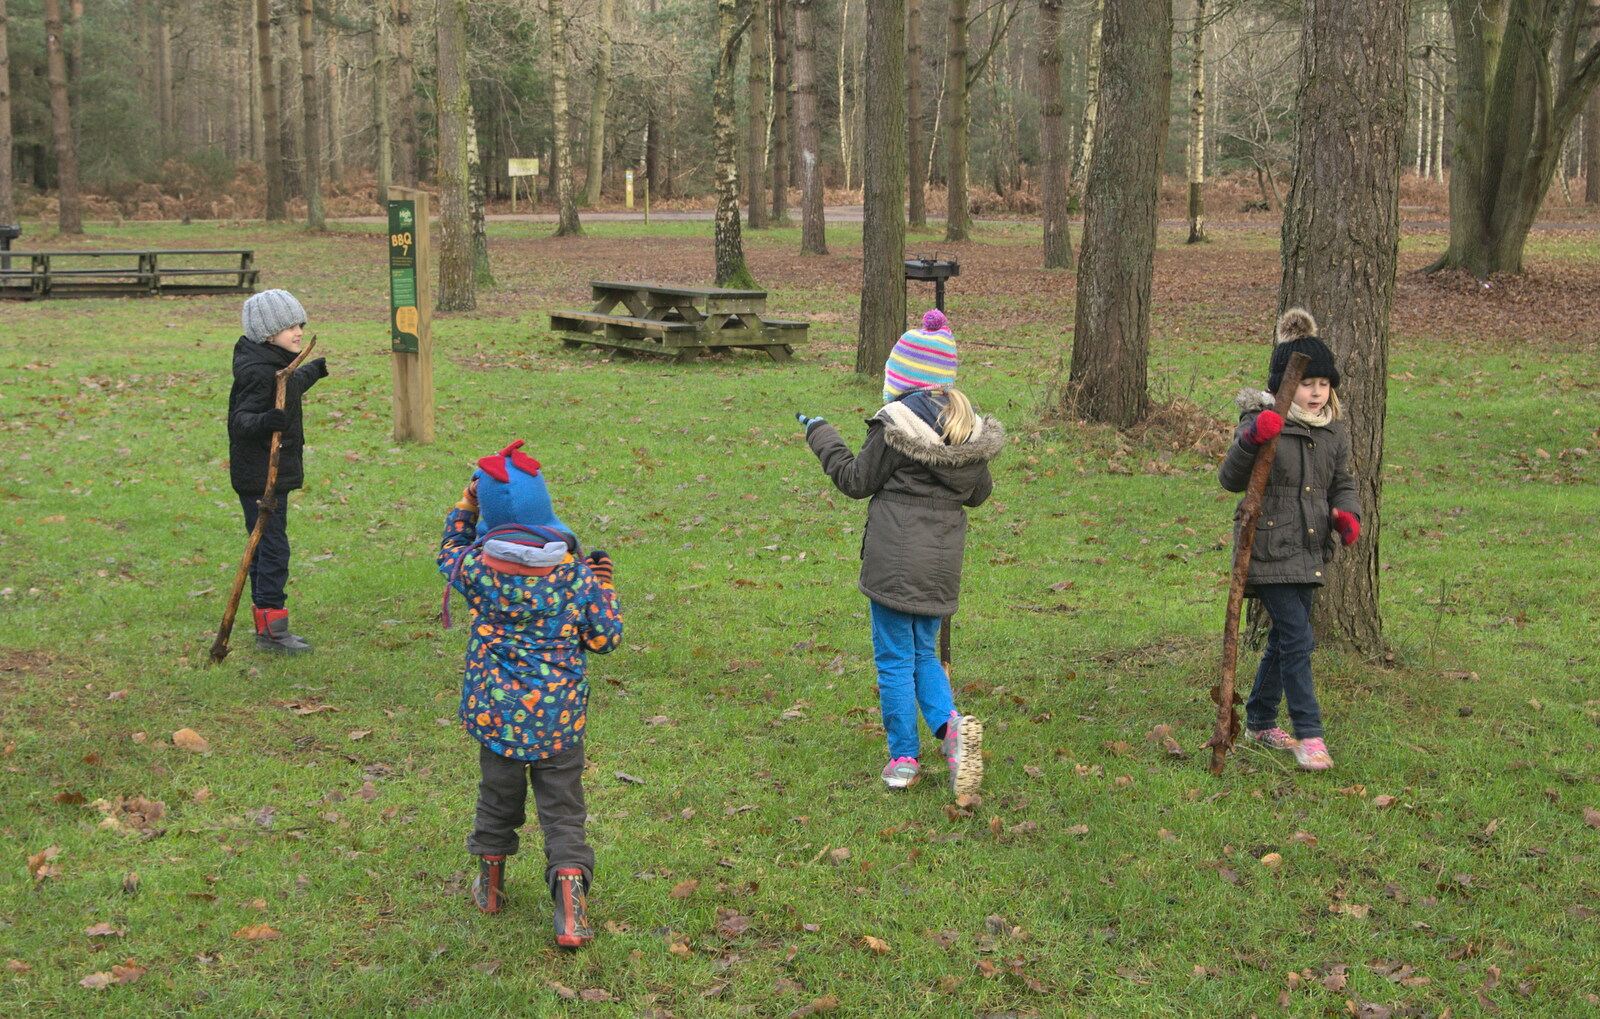 Everyone's got a stick from A Day at High Lodge, Brandon, Suffolk - 3rd January 2017